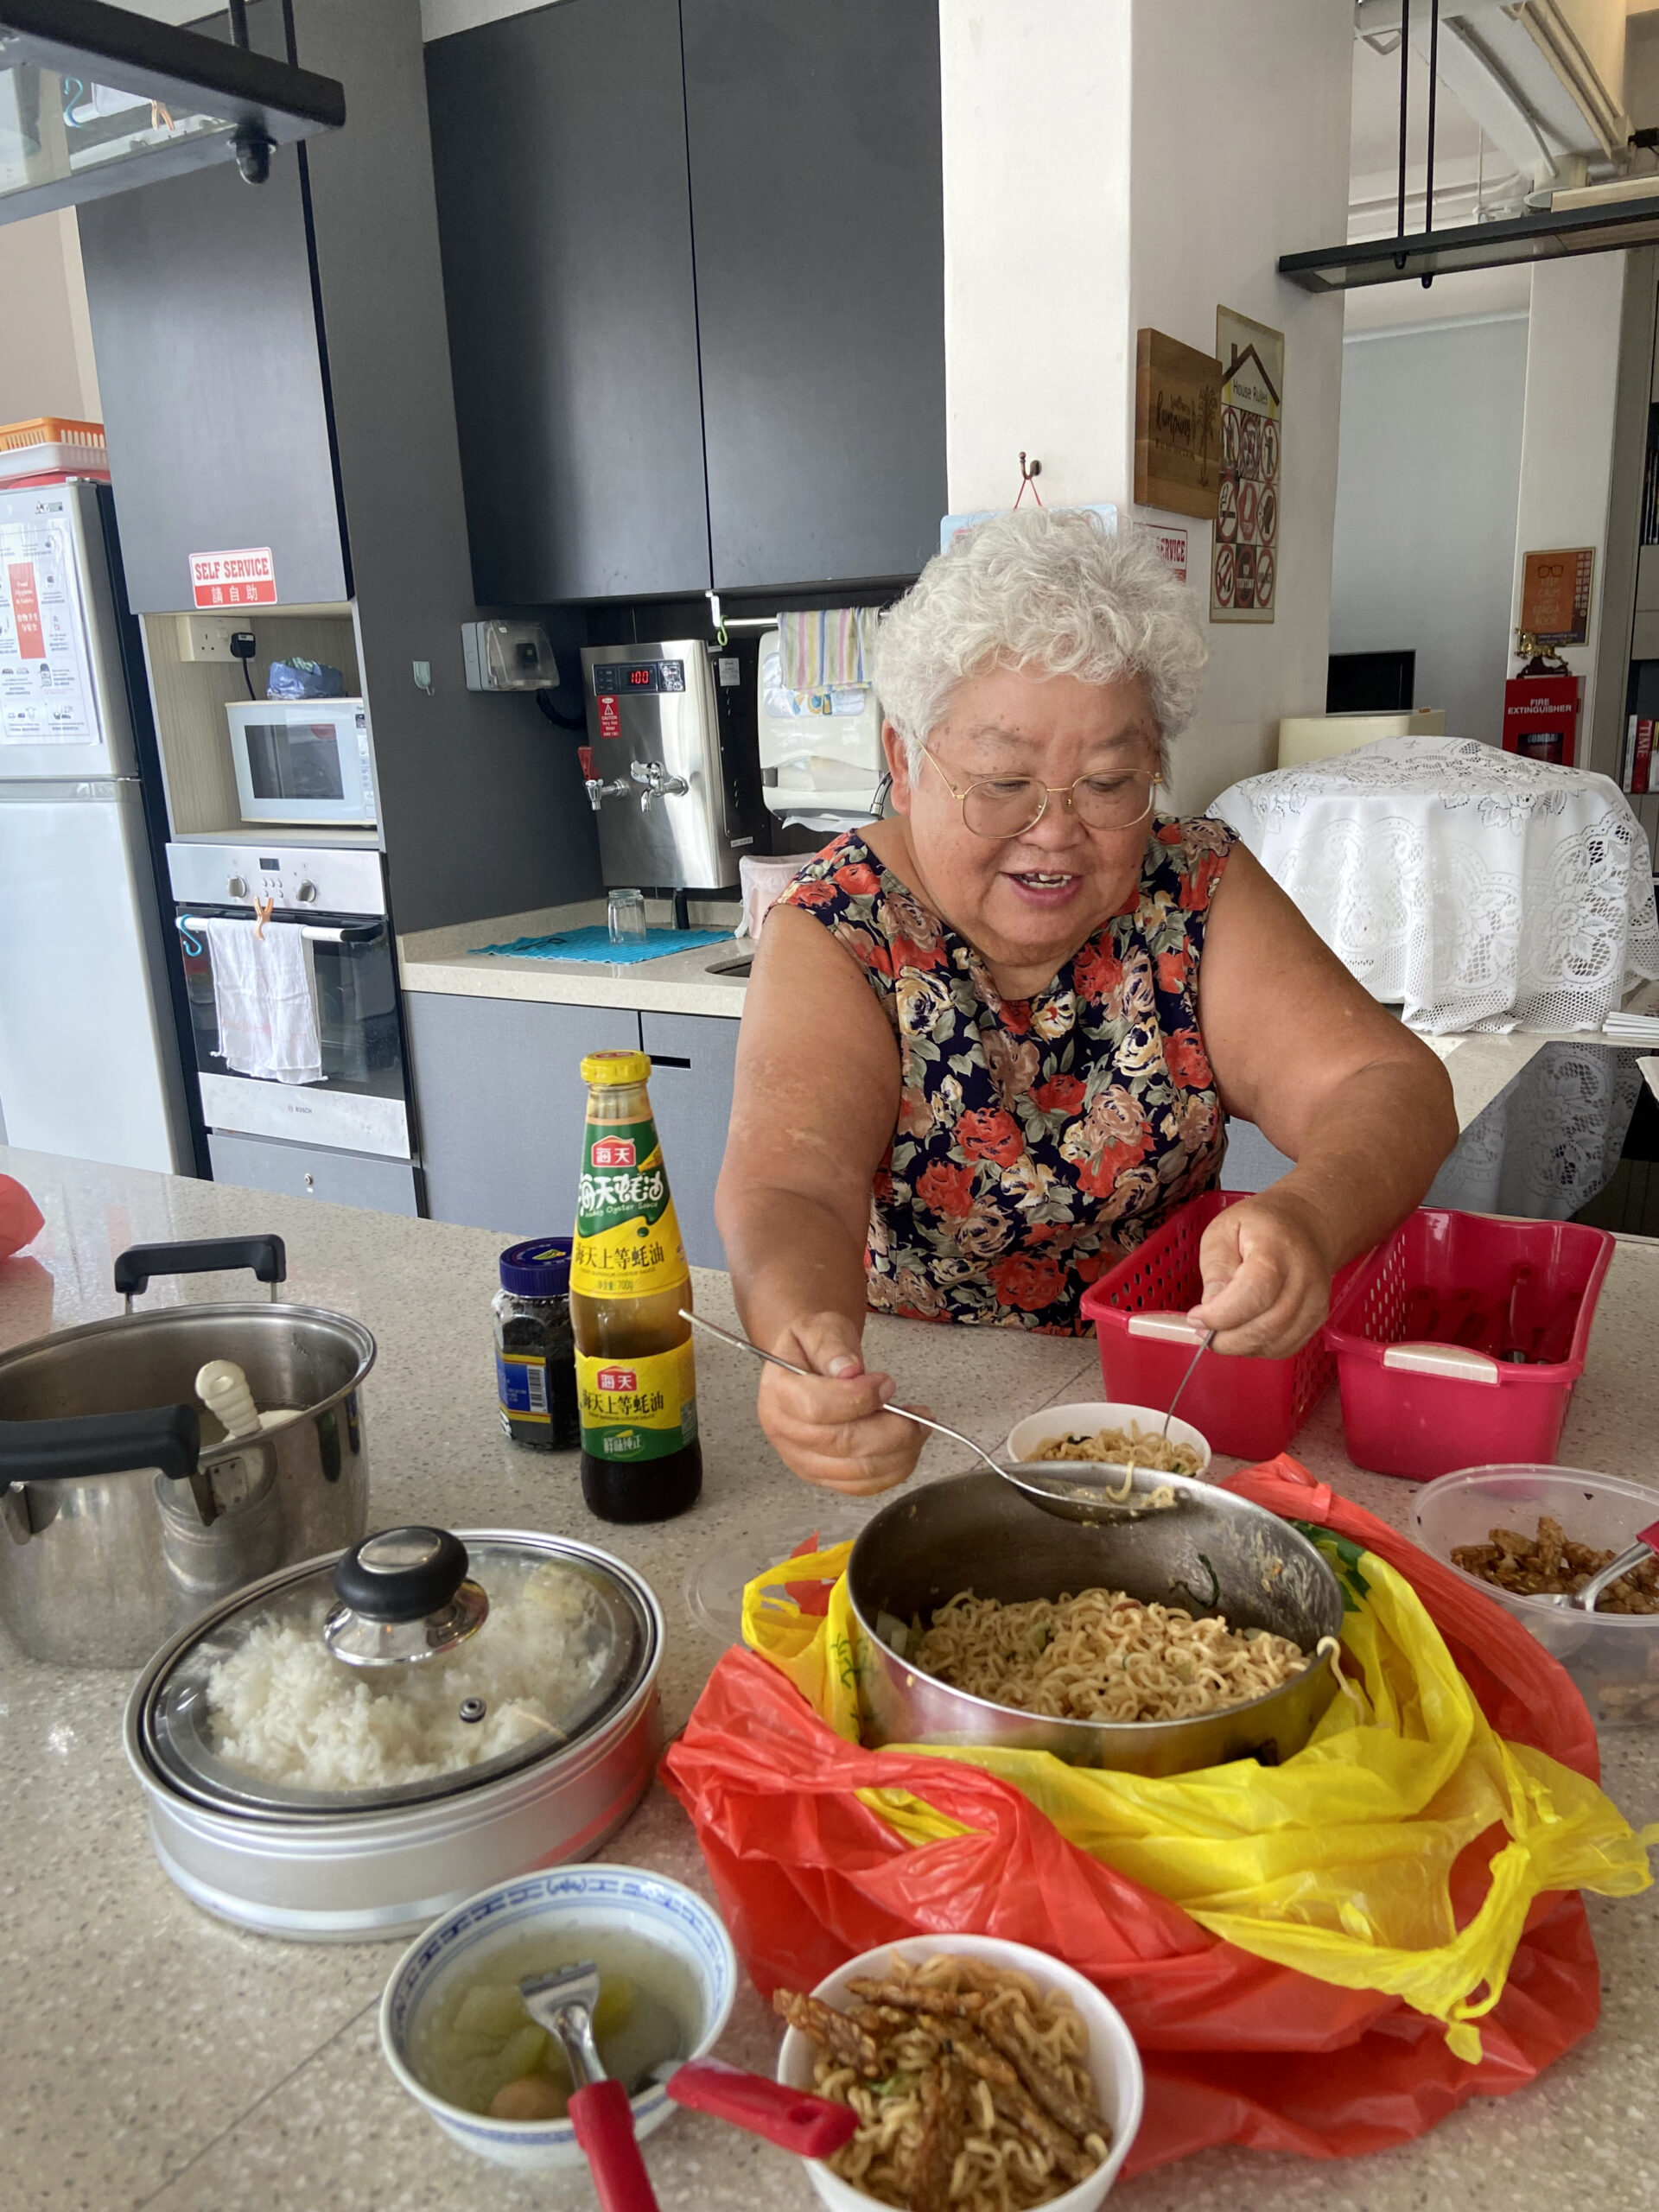 An elderly lady preparing food by the table